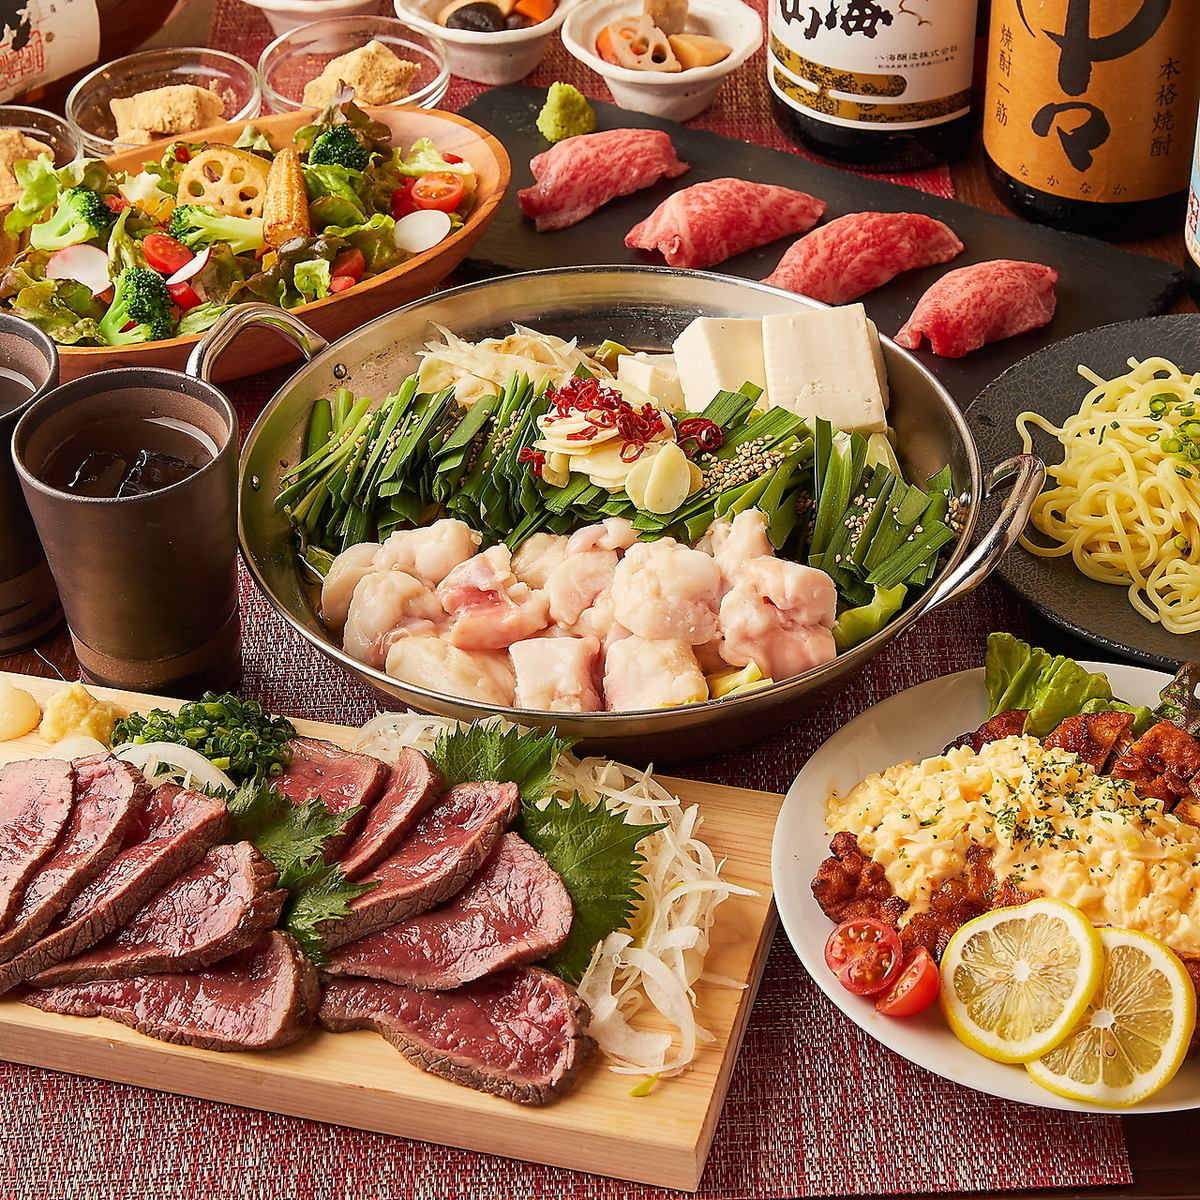 3 minutes from Yokohama Station ♪ "Yokohama-ya" is open, where you can enjoy authentic Kyushu cuisine and sashimi of yakitori and fresh fish sent directly in a private room!